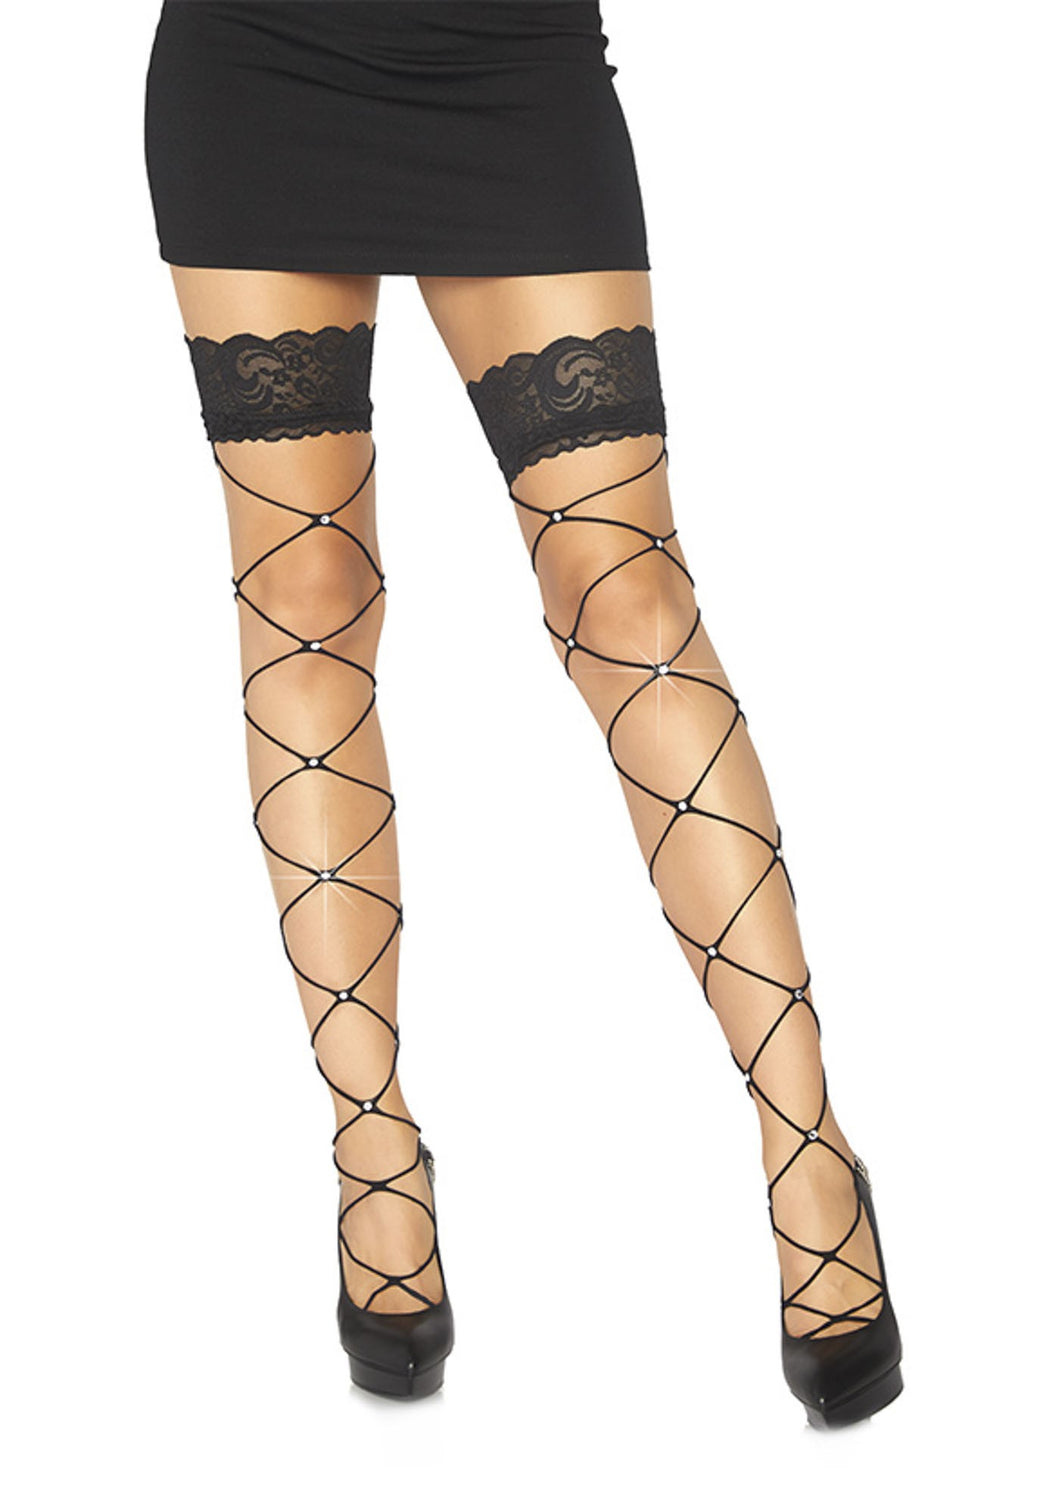 Wide net Thigh High With Chrystal